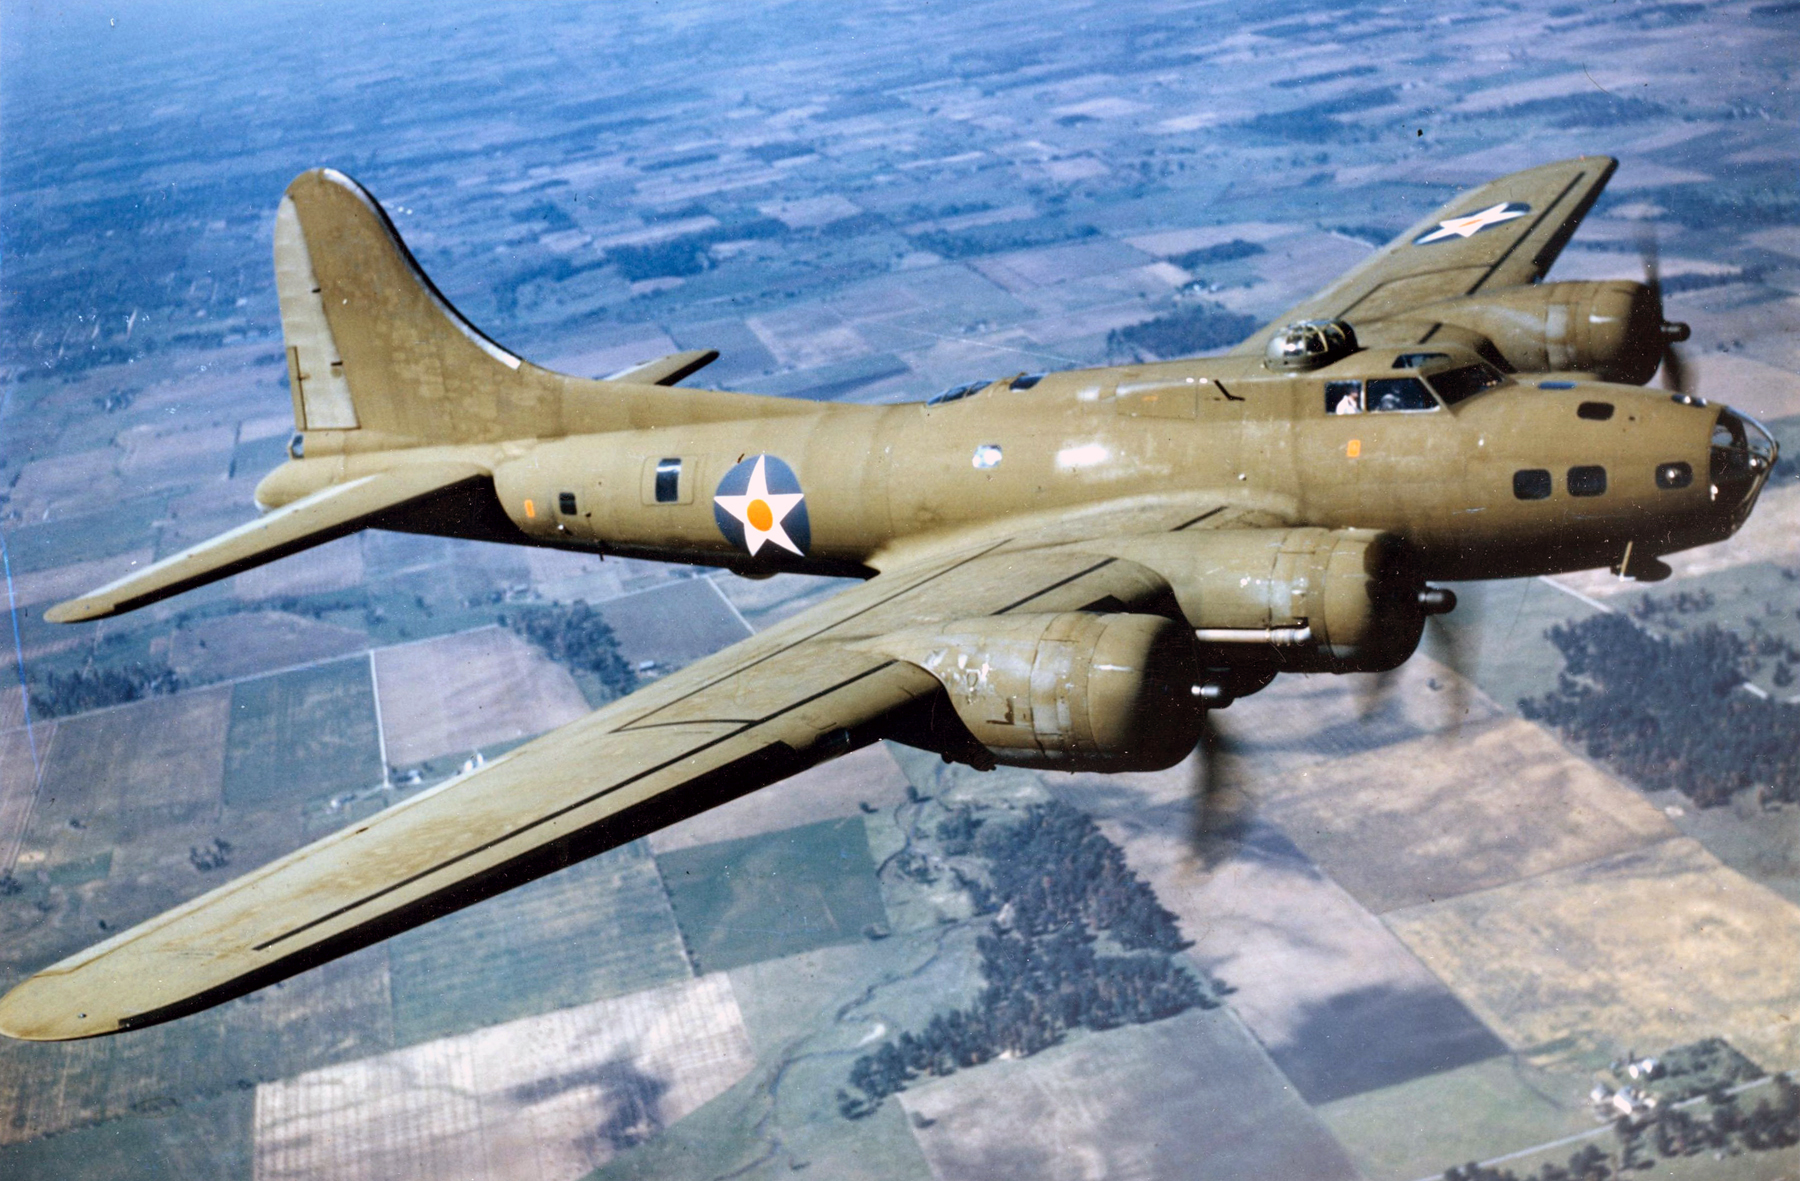 Boeing B-17 Flying Fortress previous